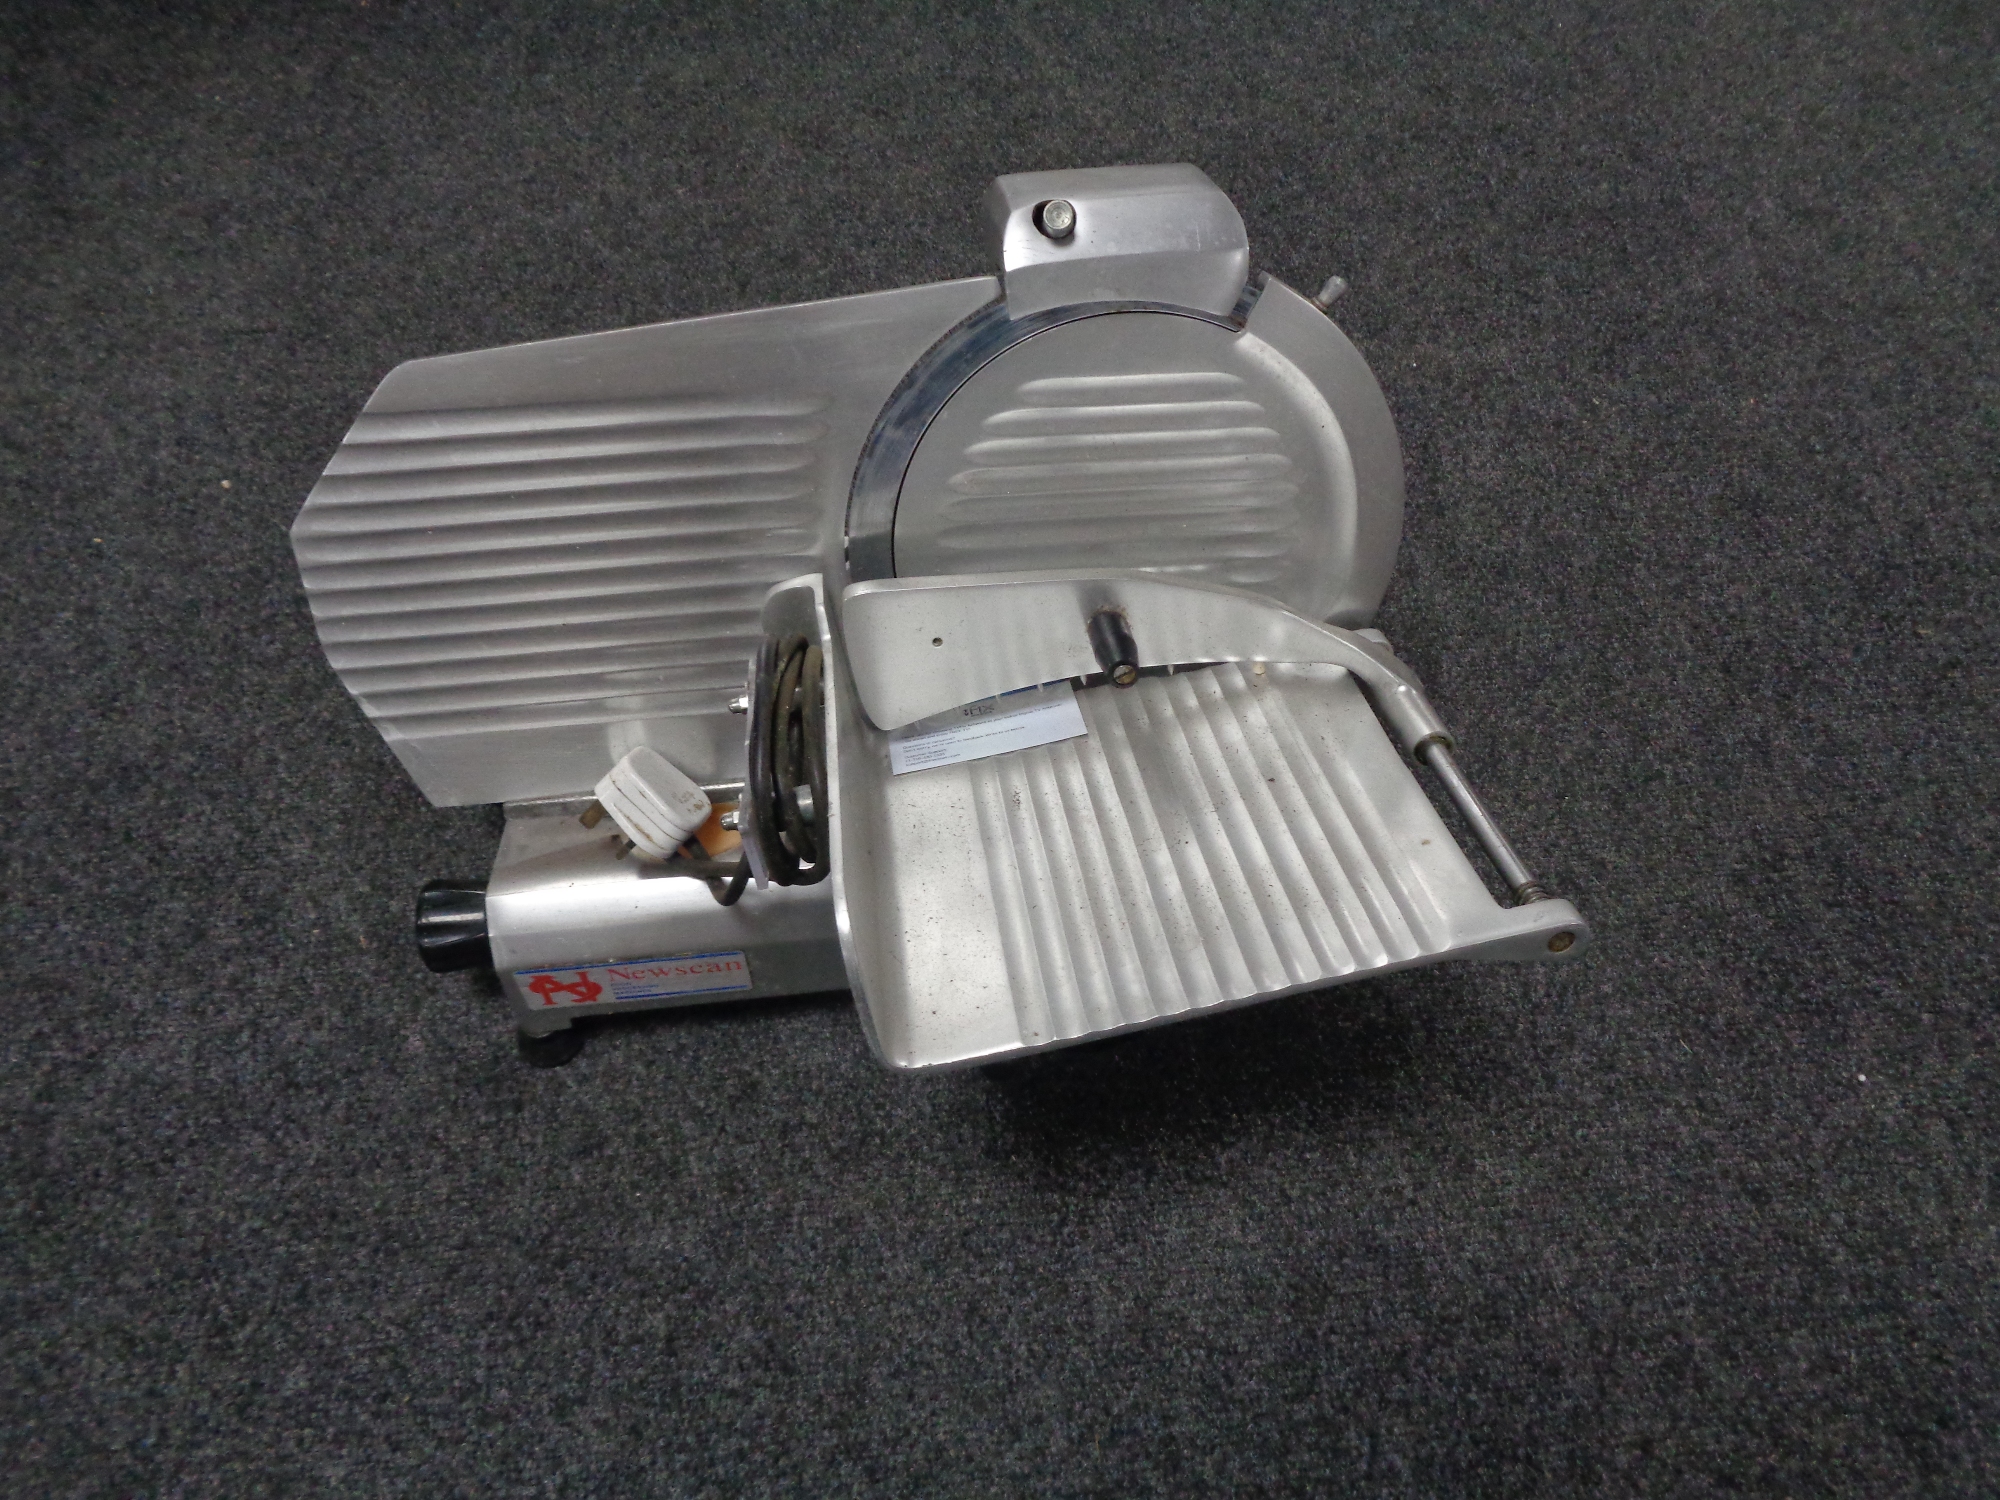 A Newscan stainless steel commercial meat slicer